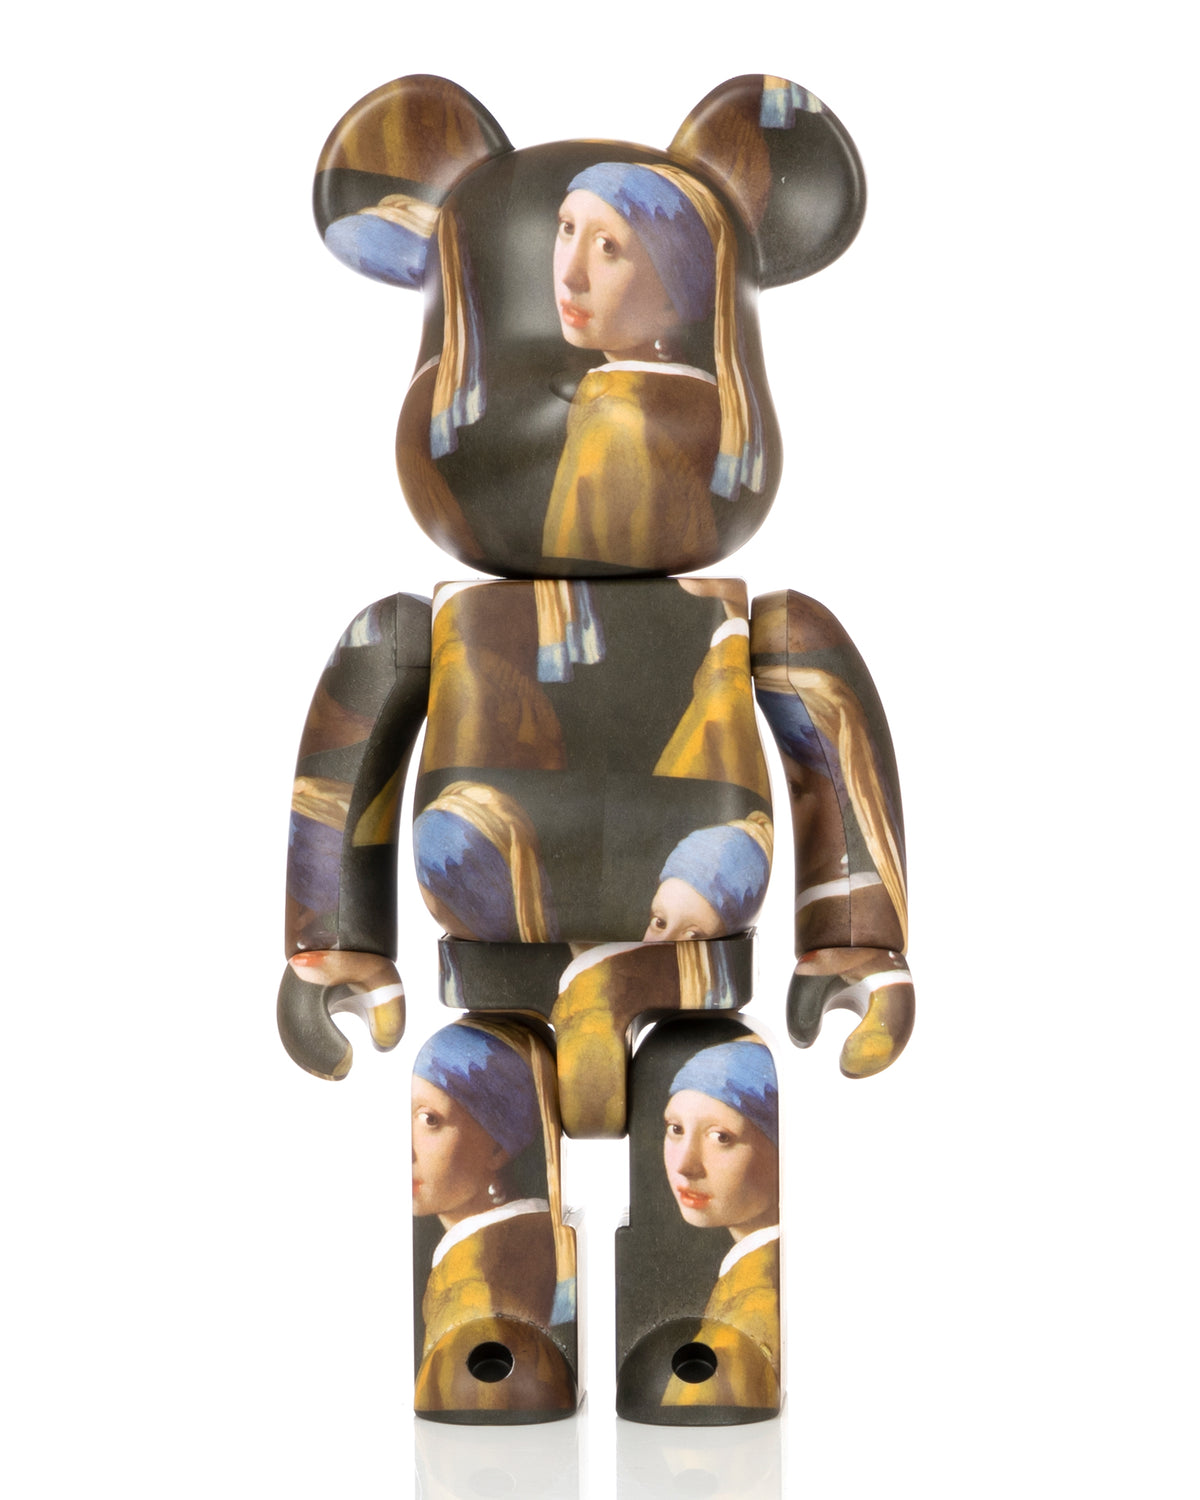 Medicom Toy | Be@rbrick 1000% Johannes Vermeer 'Girl with a Pearl Earring' - Concrete